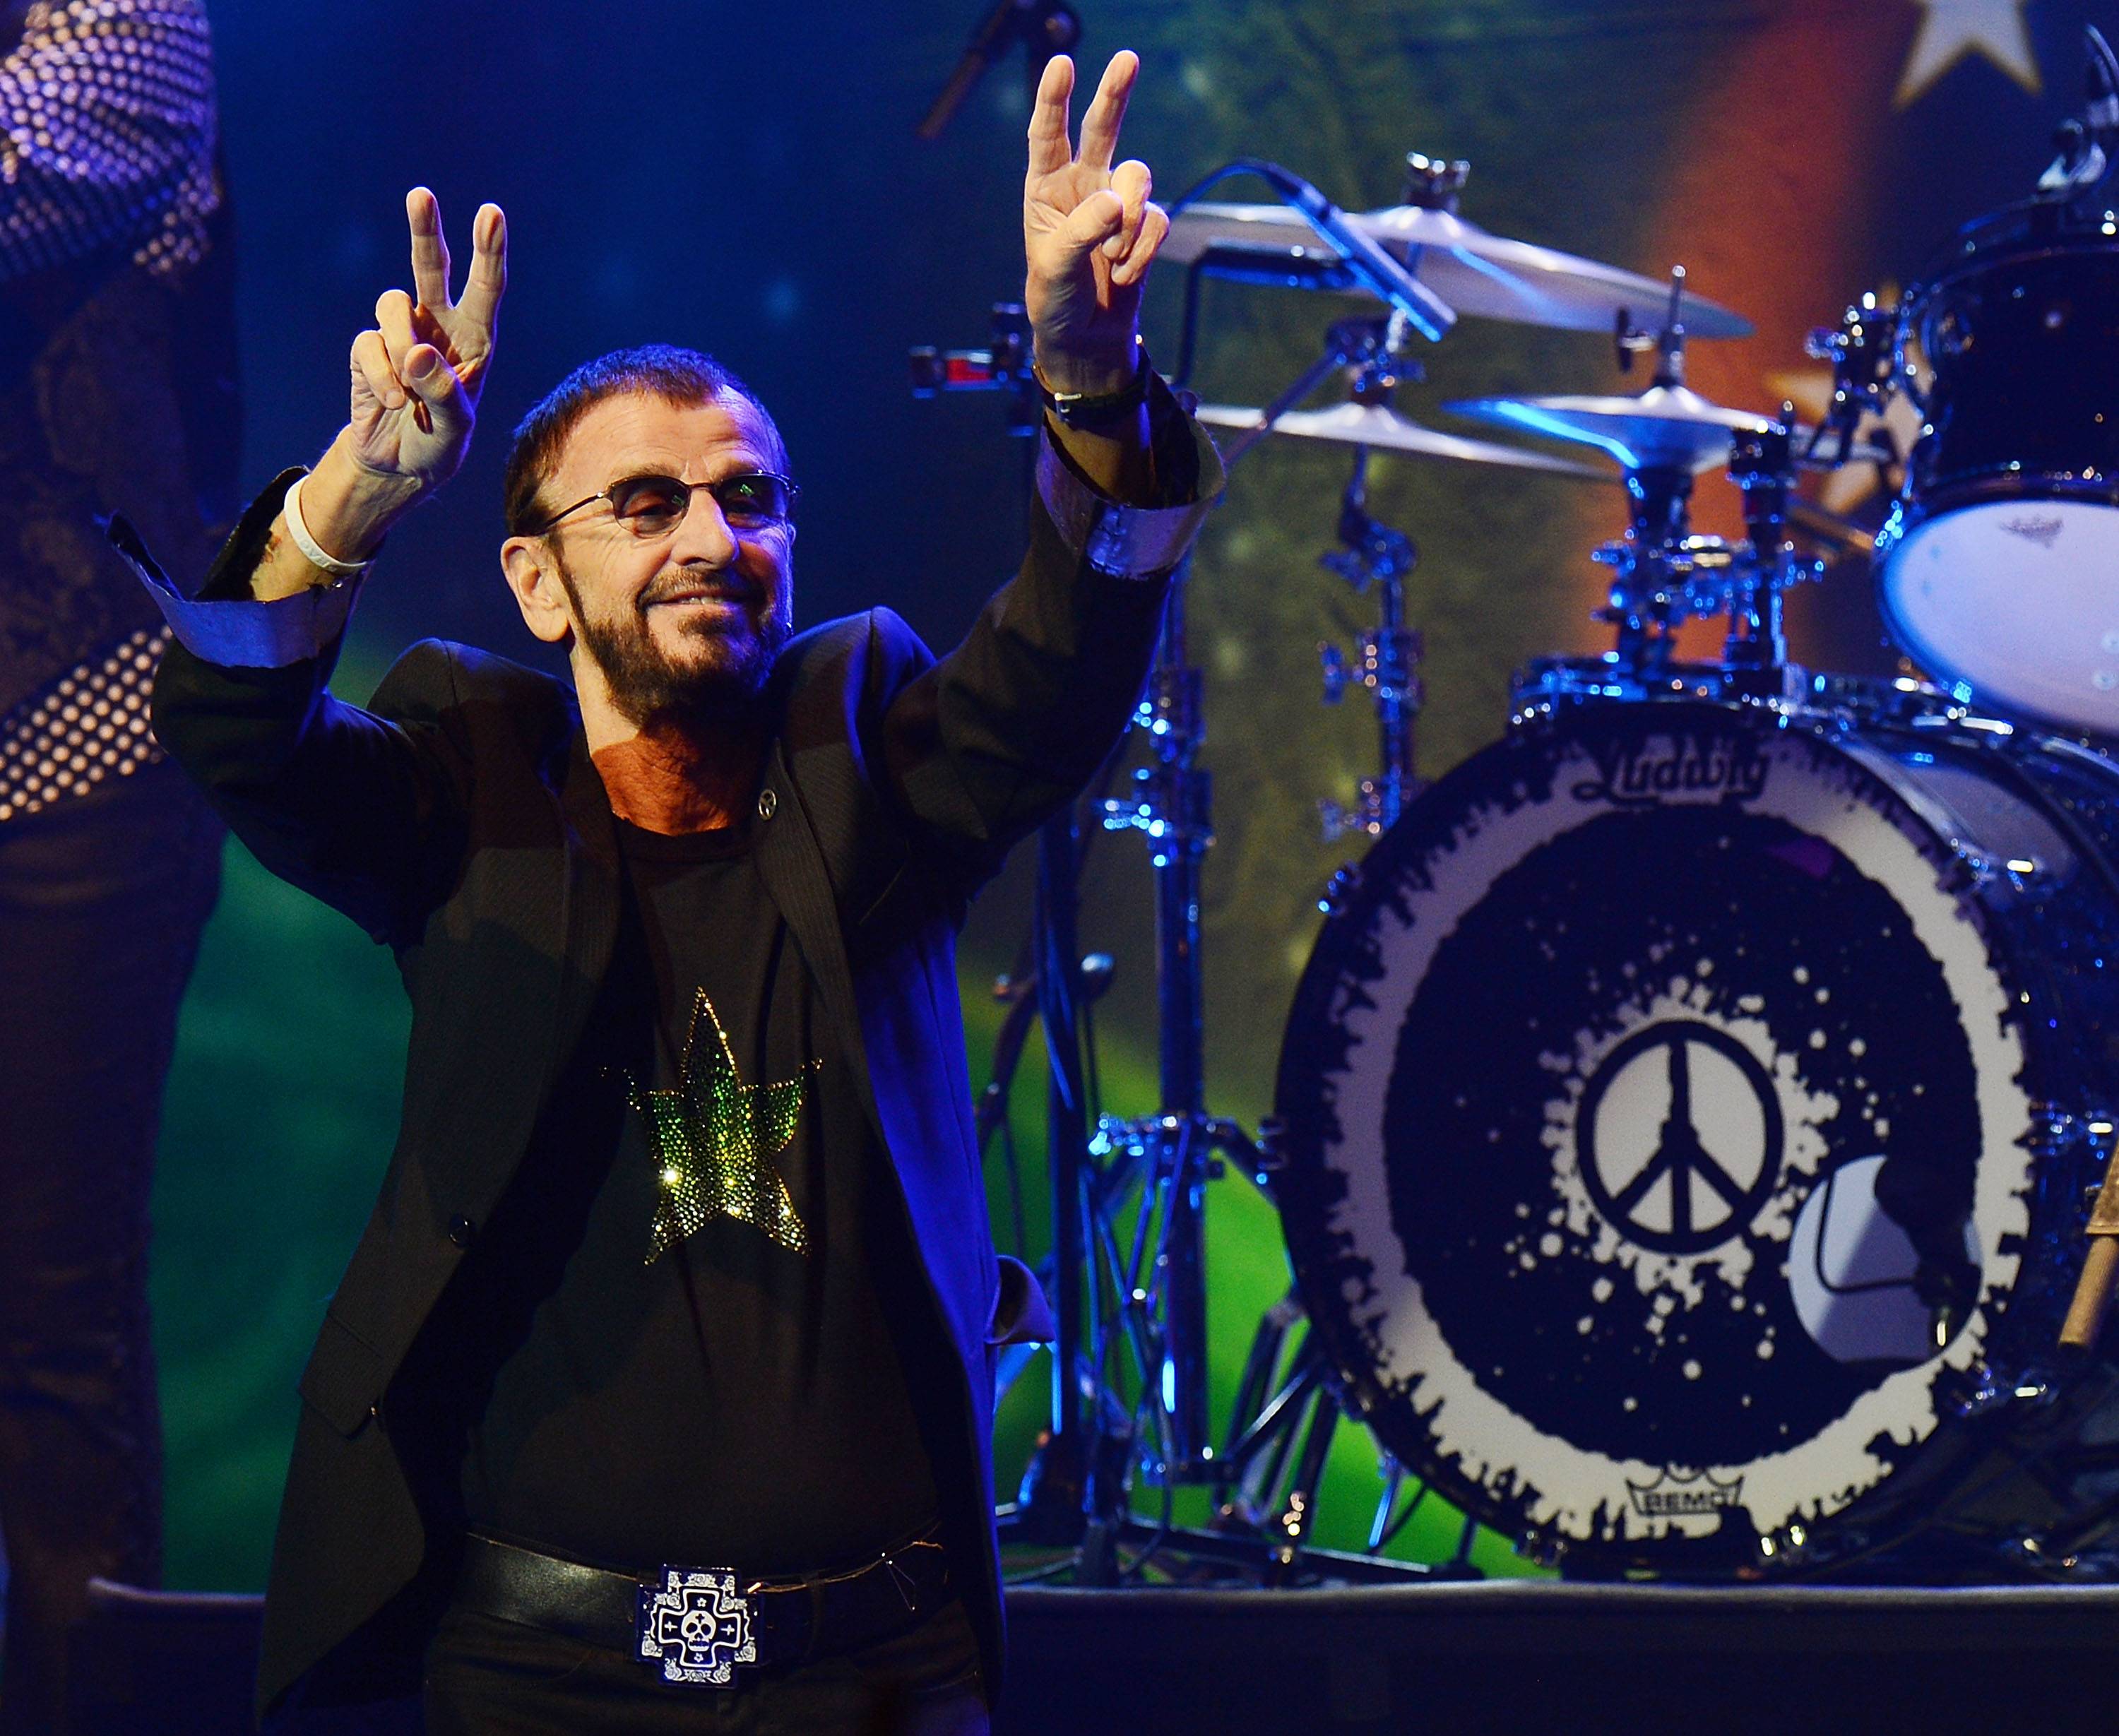 Ringo Starr & His All-Starr Band performs At The Pearl In The Palms Casino Resort